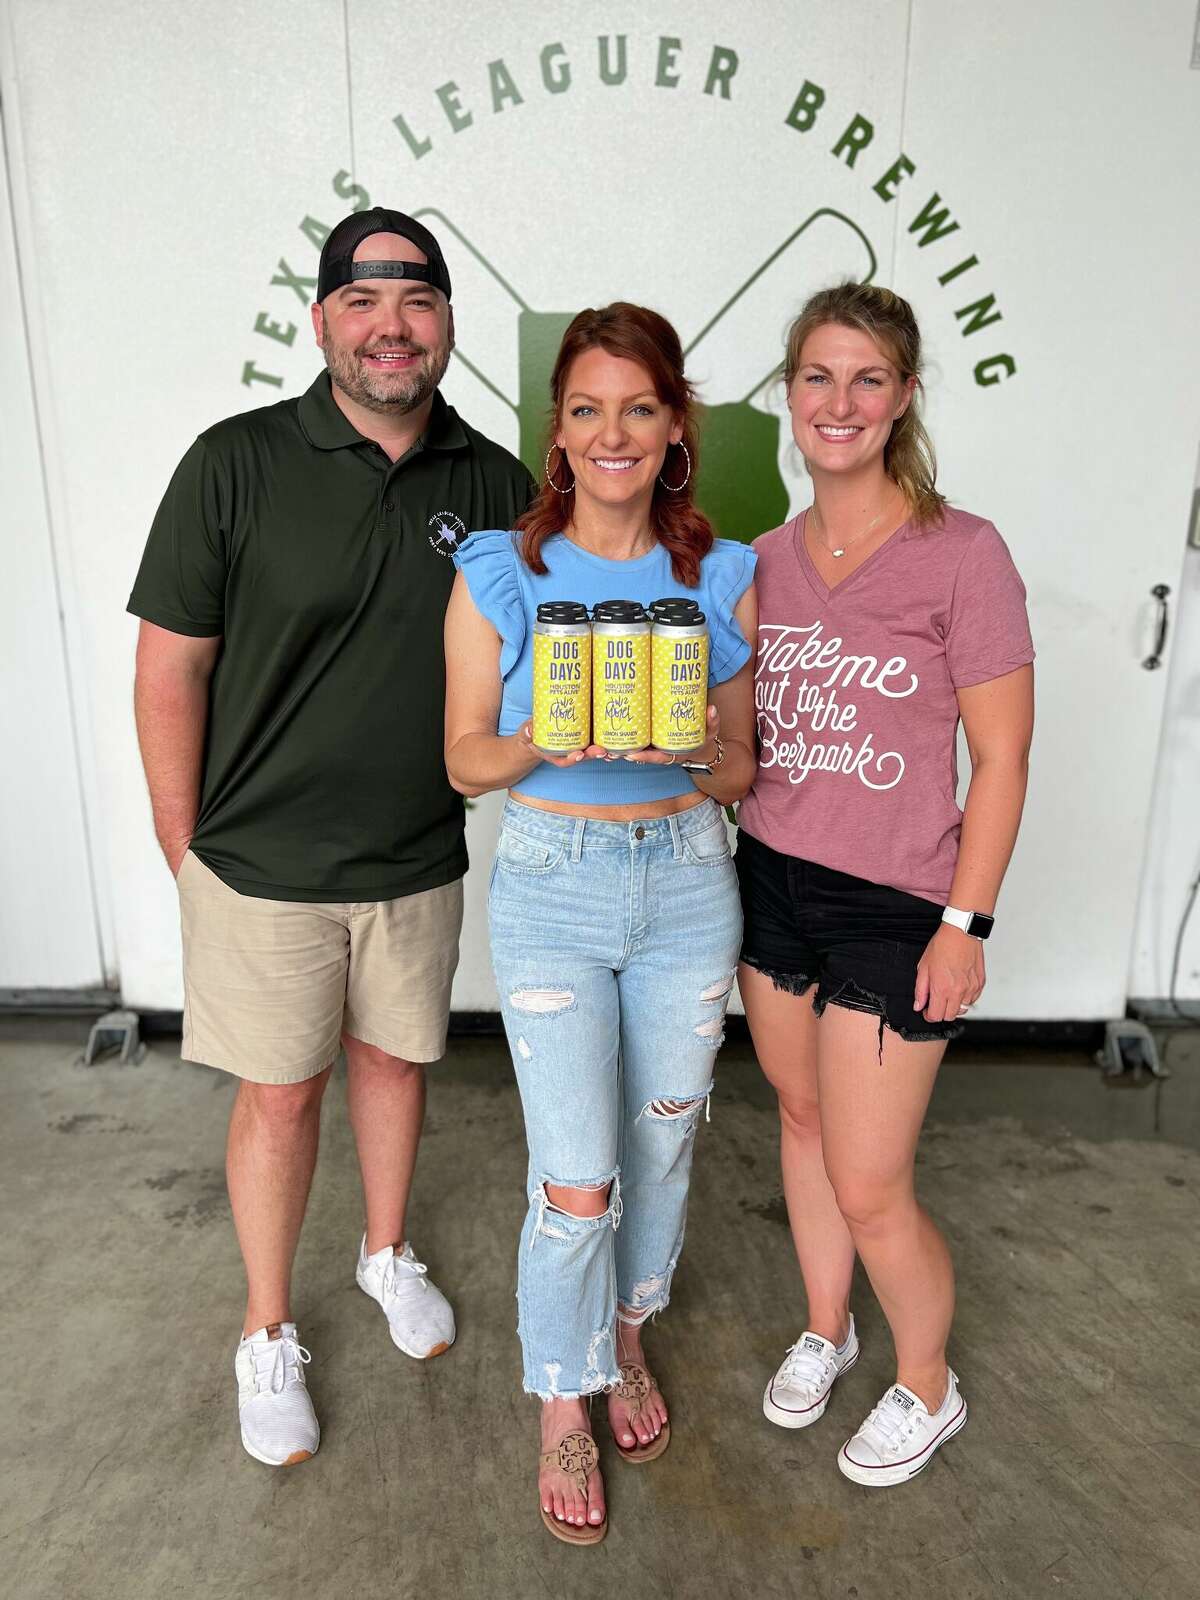 Houston Astros sideline reporter Julia Morales (center) has a collaboration beer with Nathan and Elise Rees of Texas Leaguer, called Dog Days.